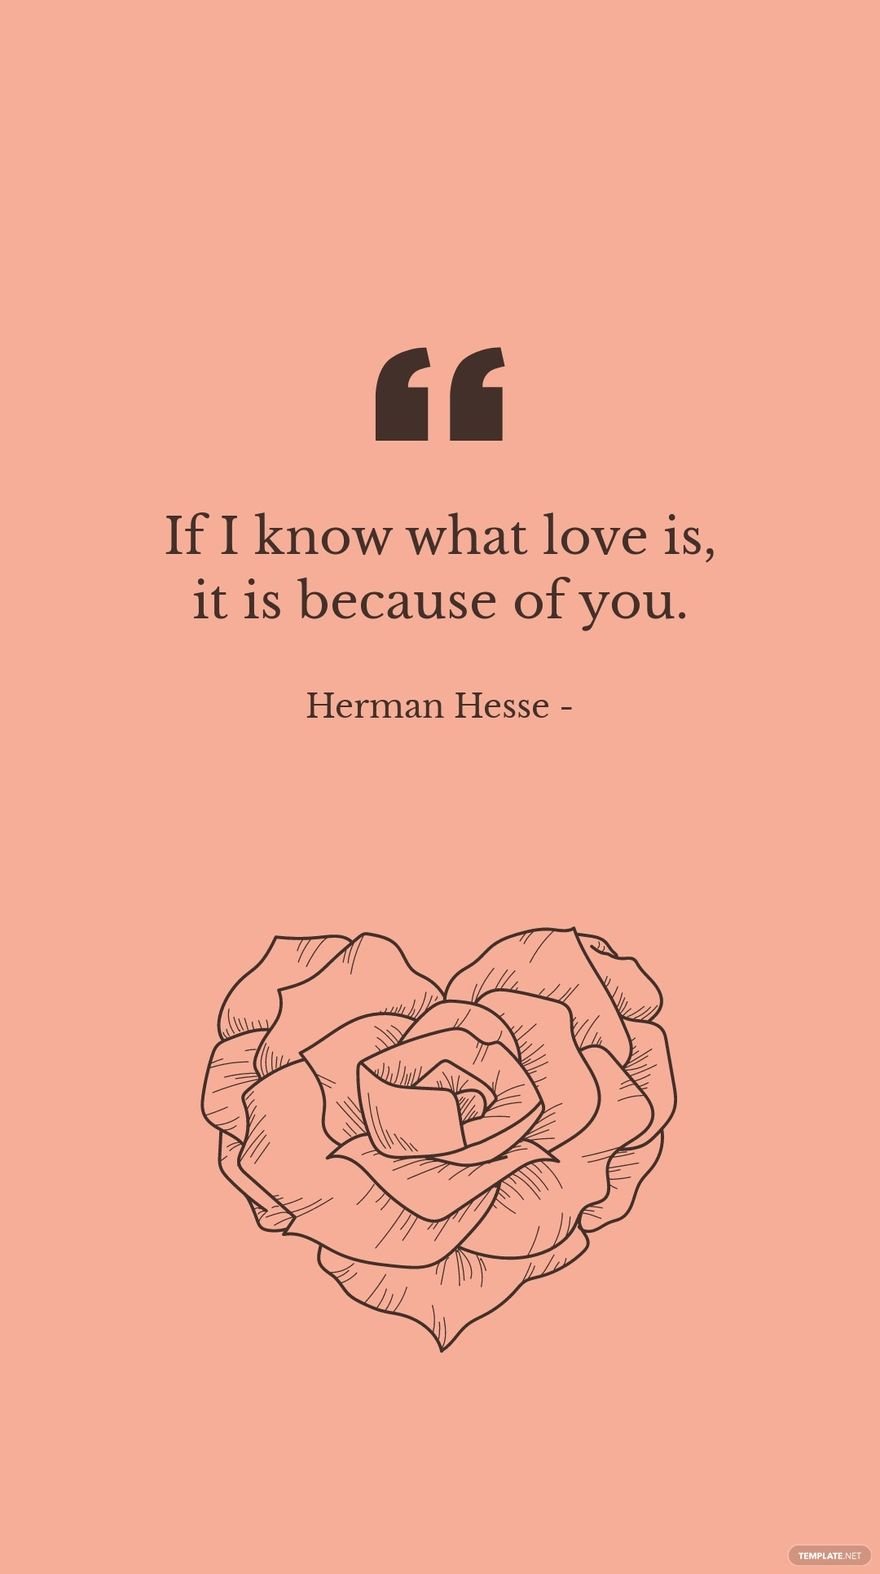 Herman Hesse - If I know what love is, it is because of you.